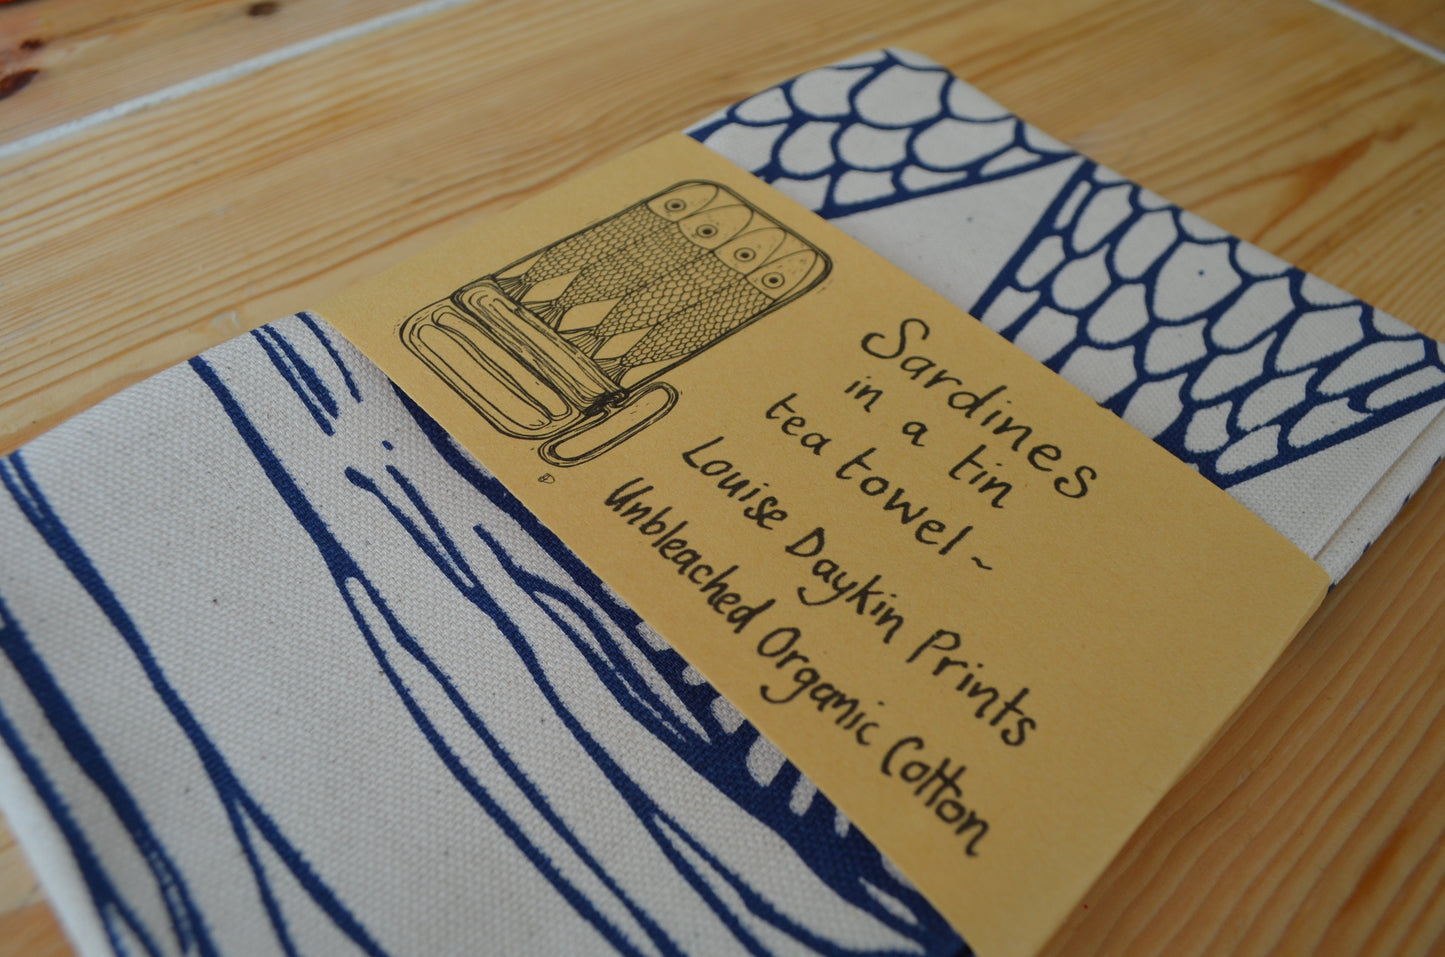 Detail of the packaged "Sardines in a tin" Tea Teatowel with brown paper wrap and handwritten type "Sardines in a tin tea towel, Louise Daykin Prints, Unbleached Organic Cotton